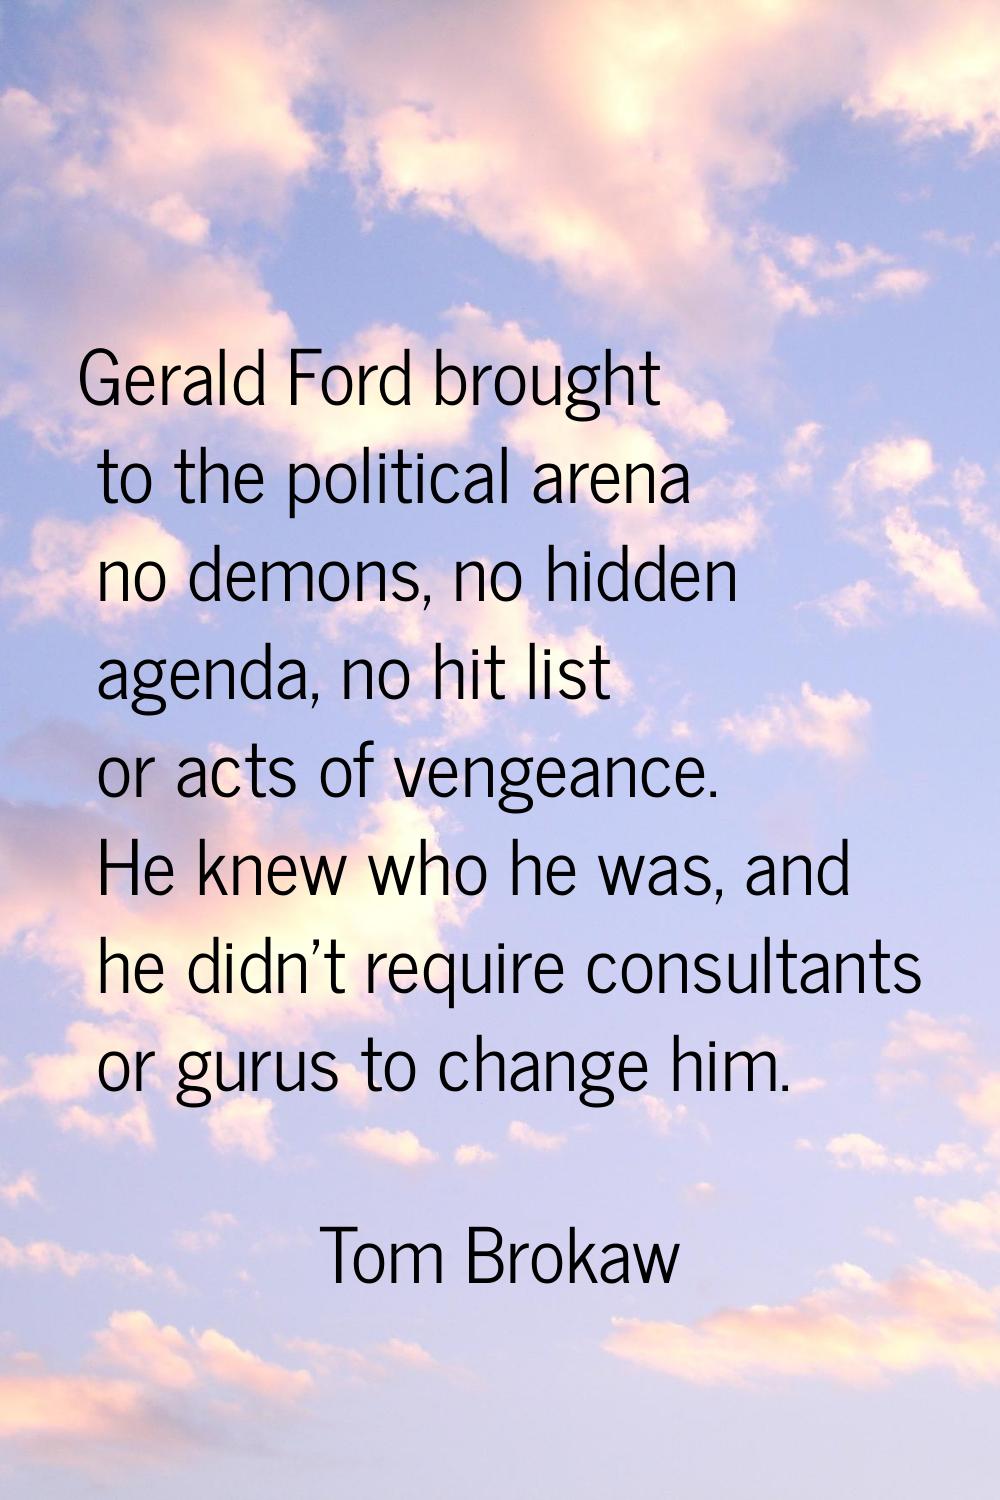 Gerald Ford brought to the political arena no demons, no hidden agenda, no hit list or acts of veng